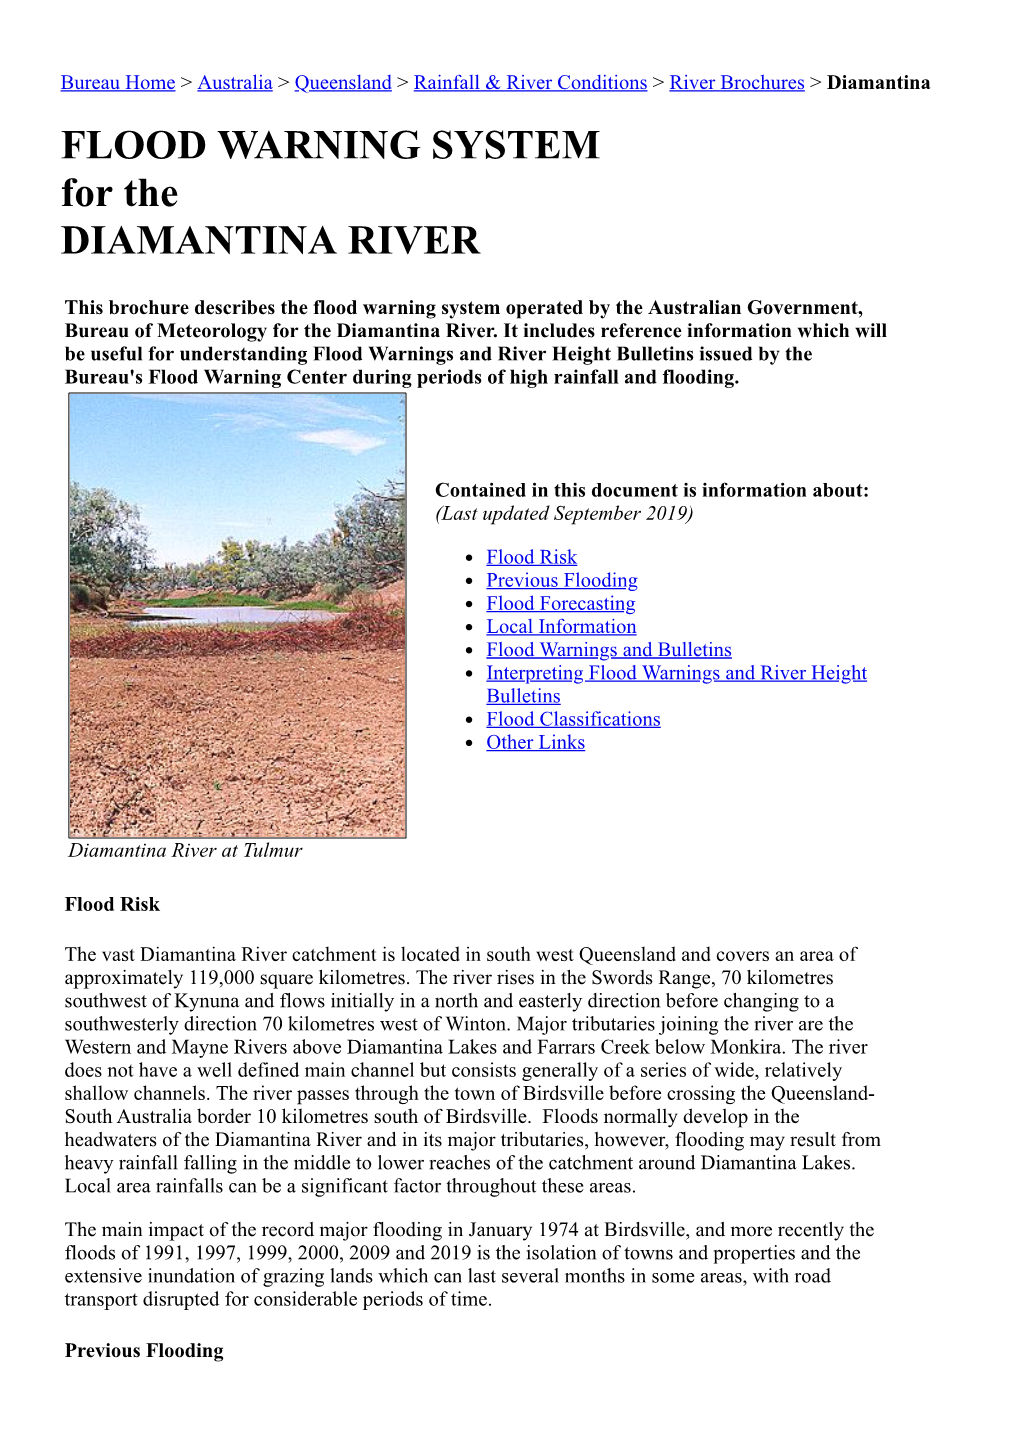 FLOOD WARNING SYSTEM for the DIAMANTINA RIVER